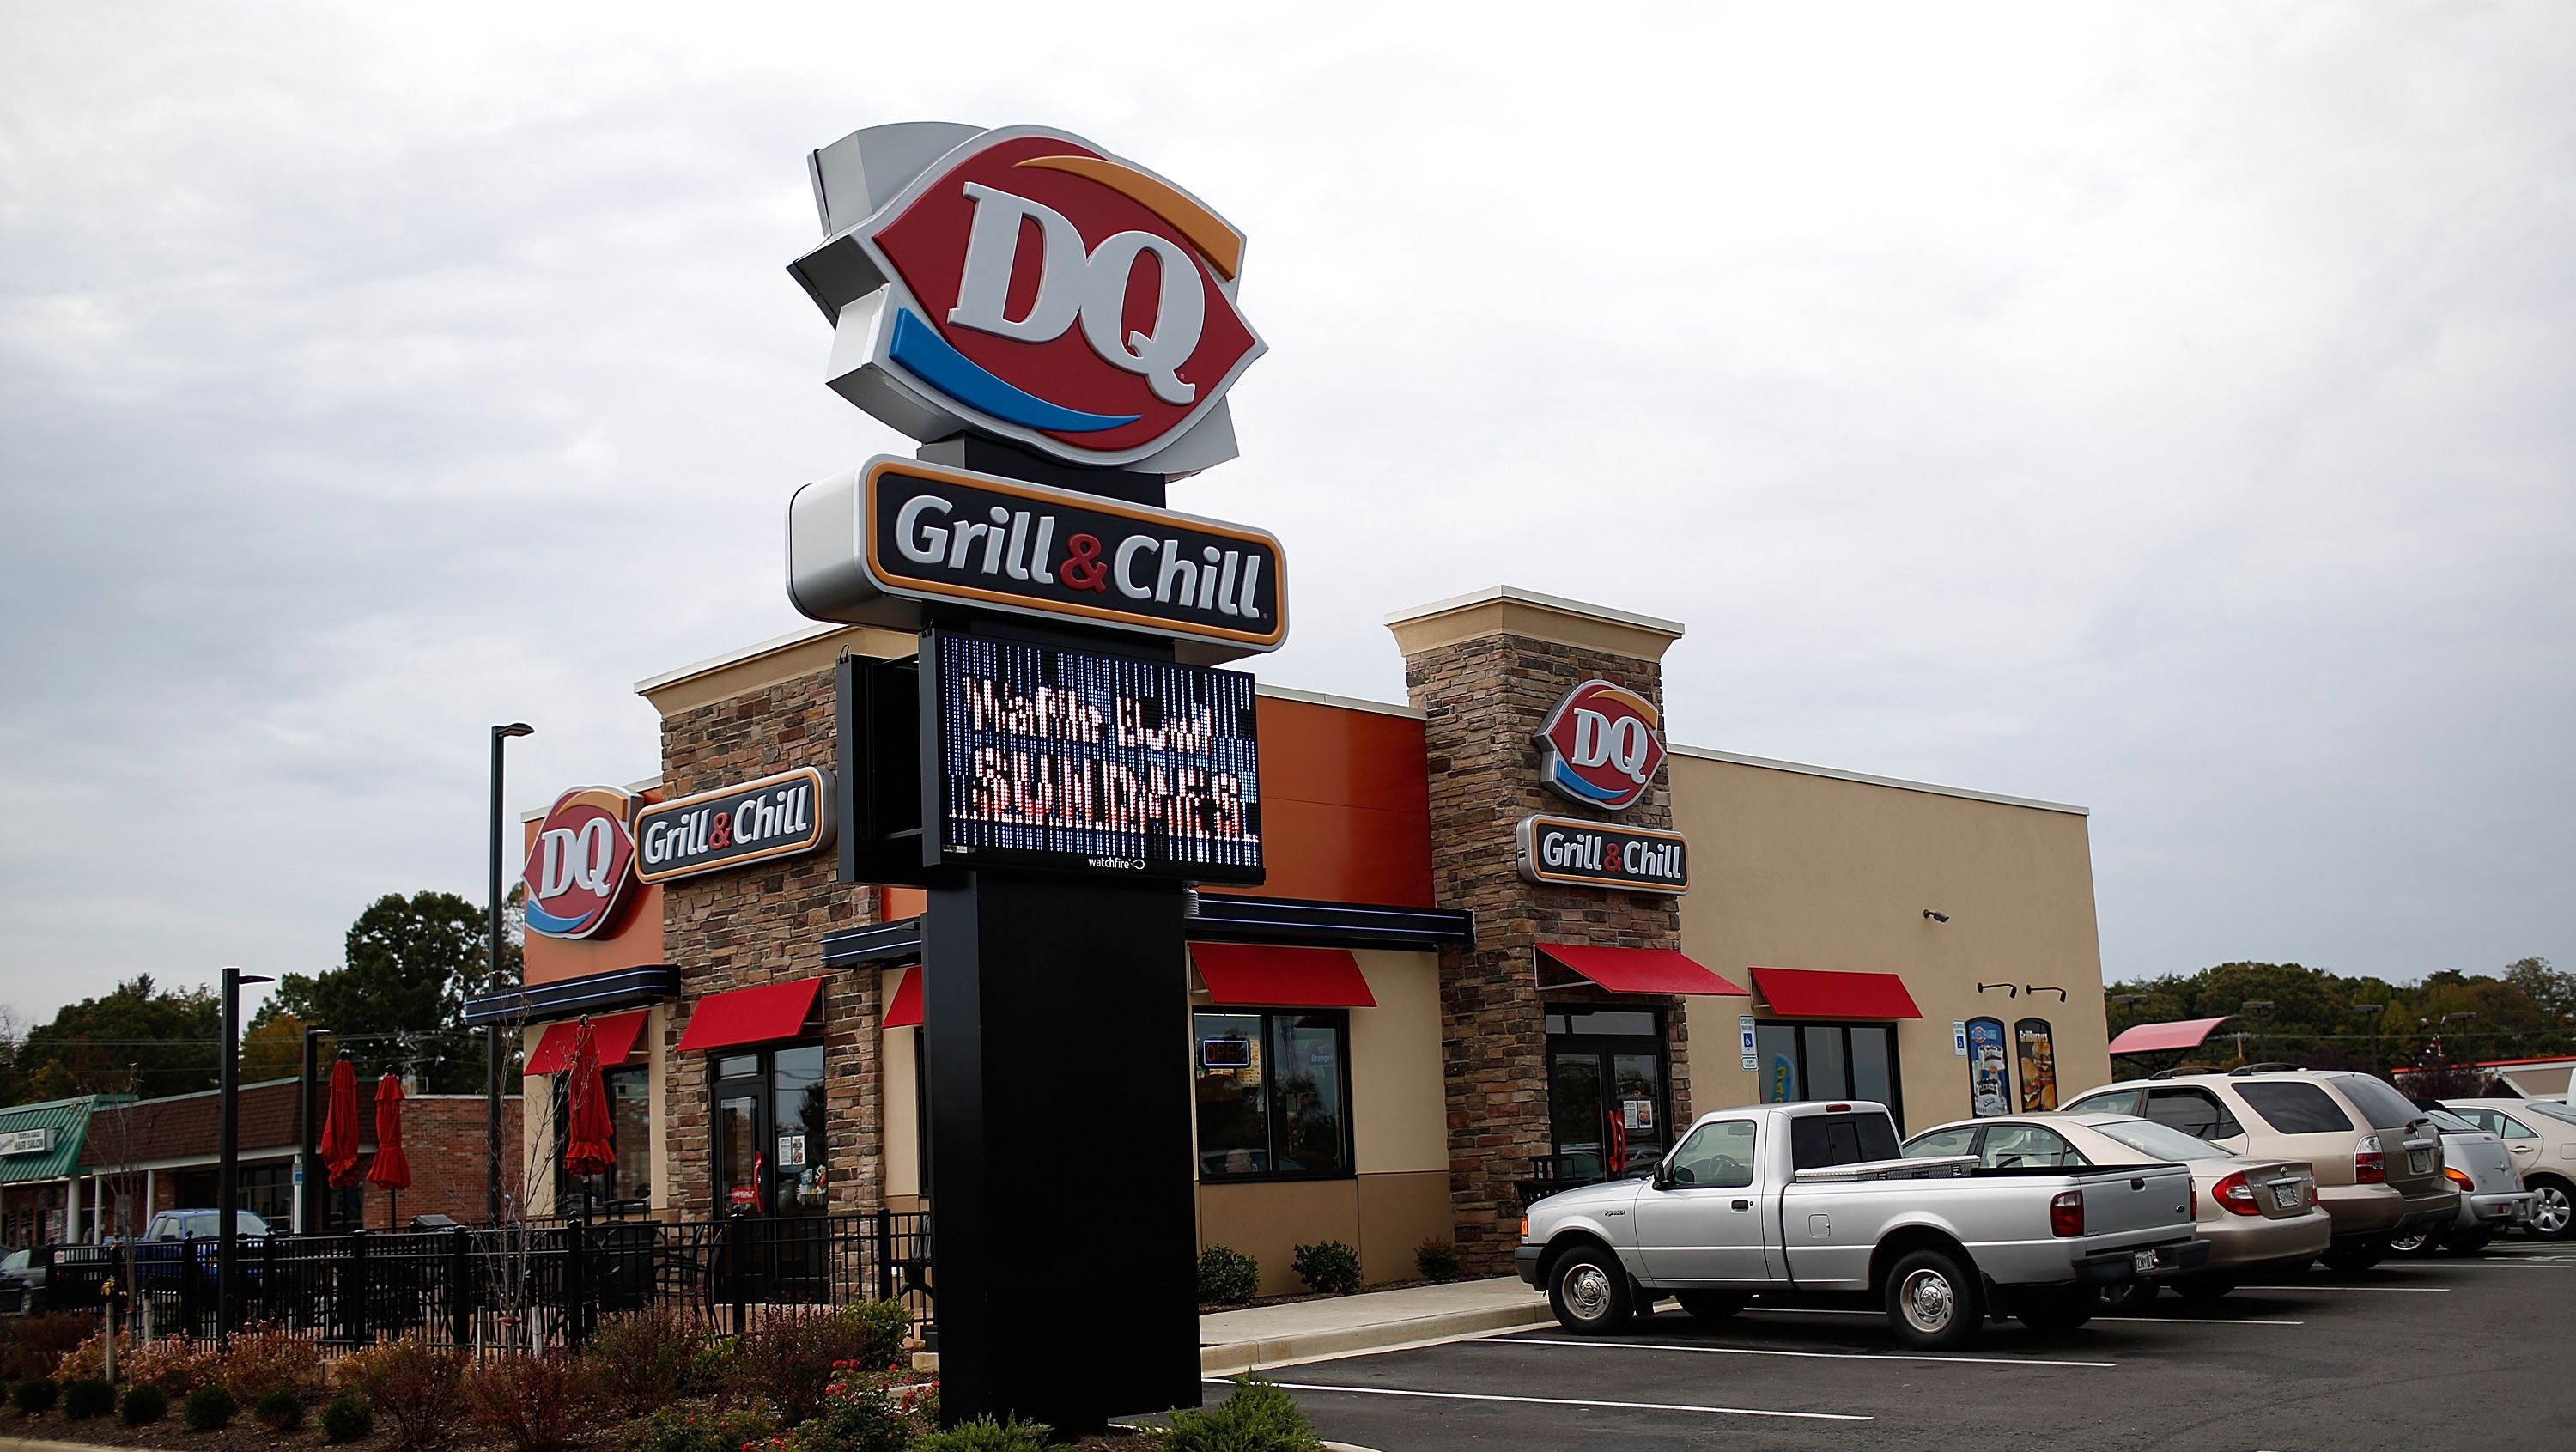 Did Dairy Queen Launch a Taylor Swift-Inspired Blizzard?